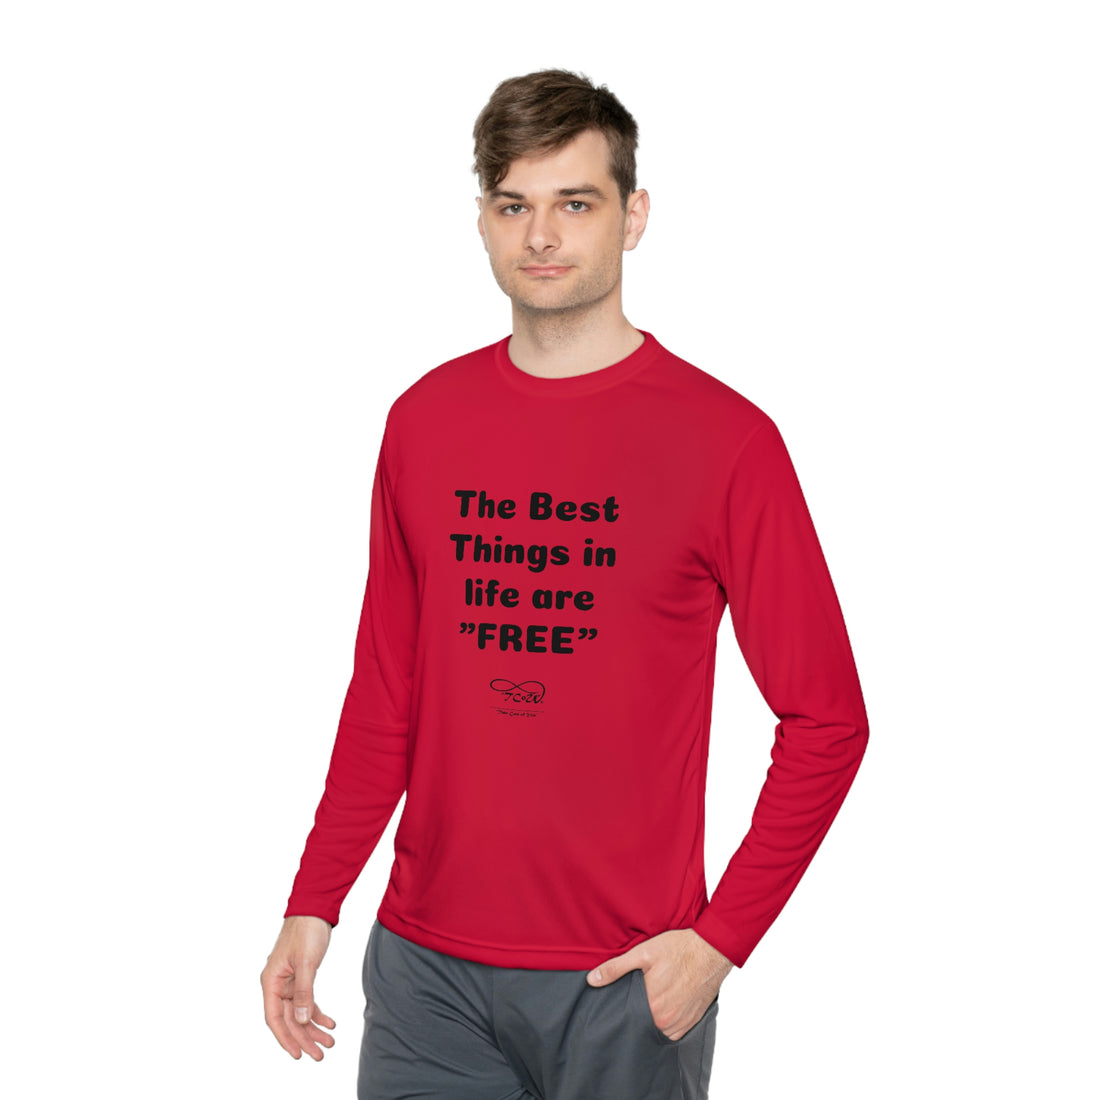 FUN QUOTES -- "Best Things in Life are FREE” — Unless it's her birthday!! — Unisex Lightweight Long Sleeve Tee